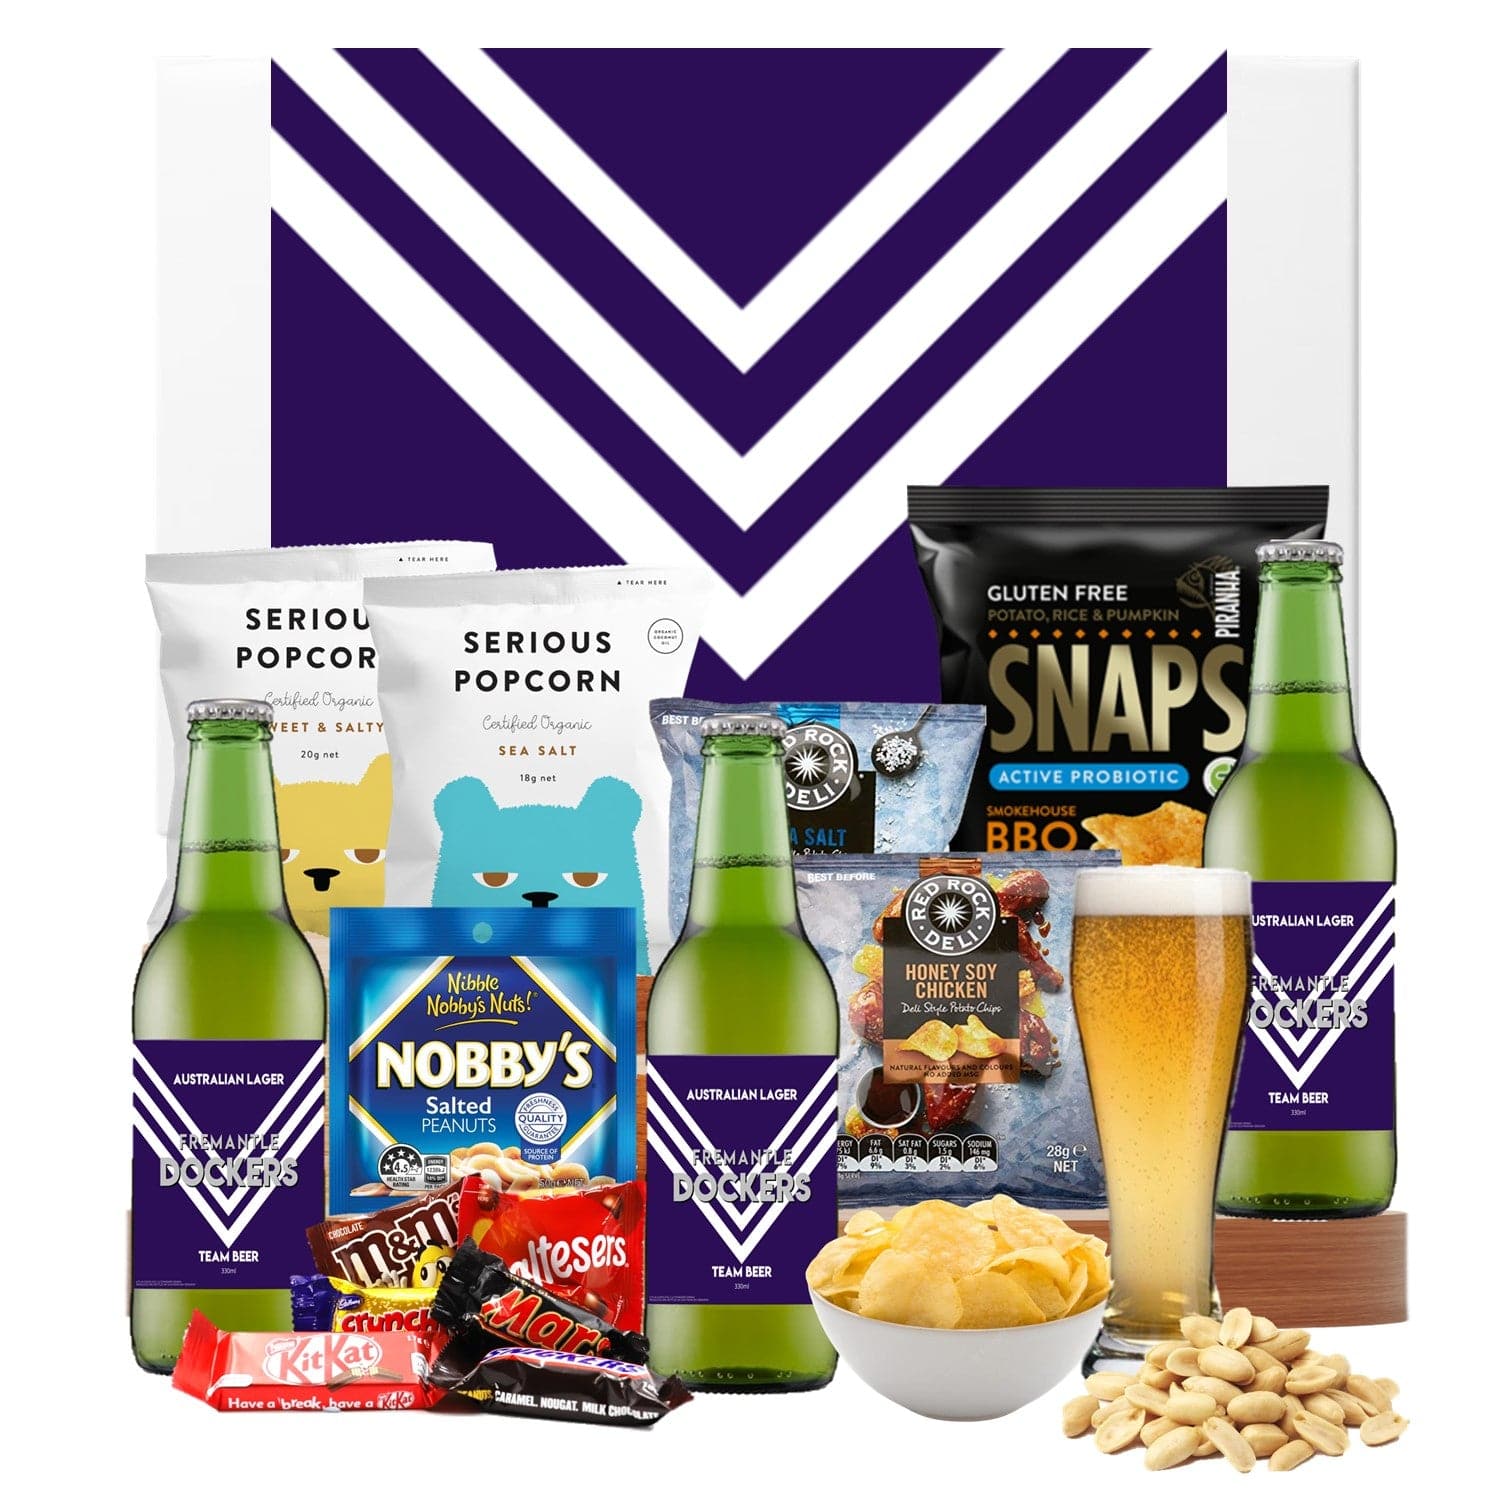 The AFL Beer Sports Pack